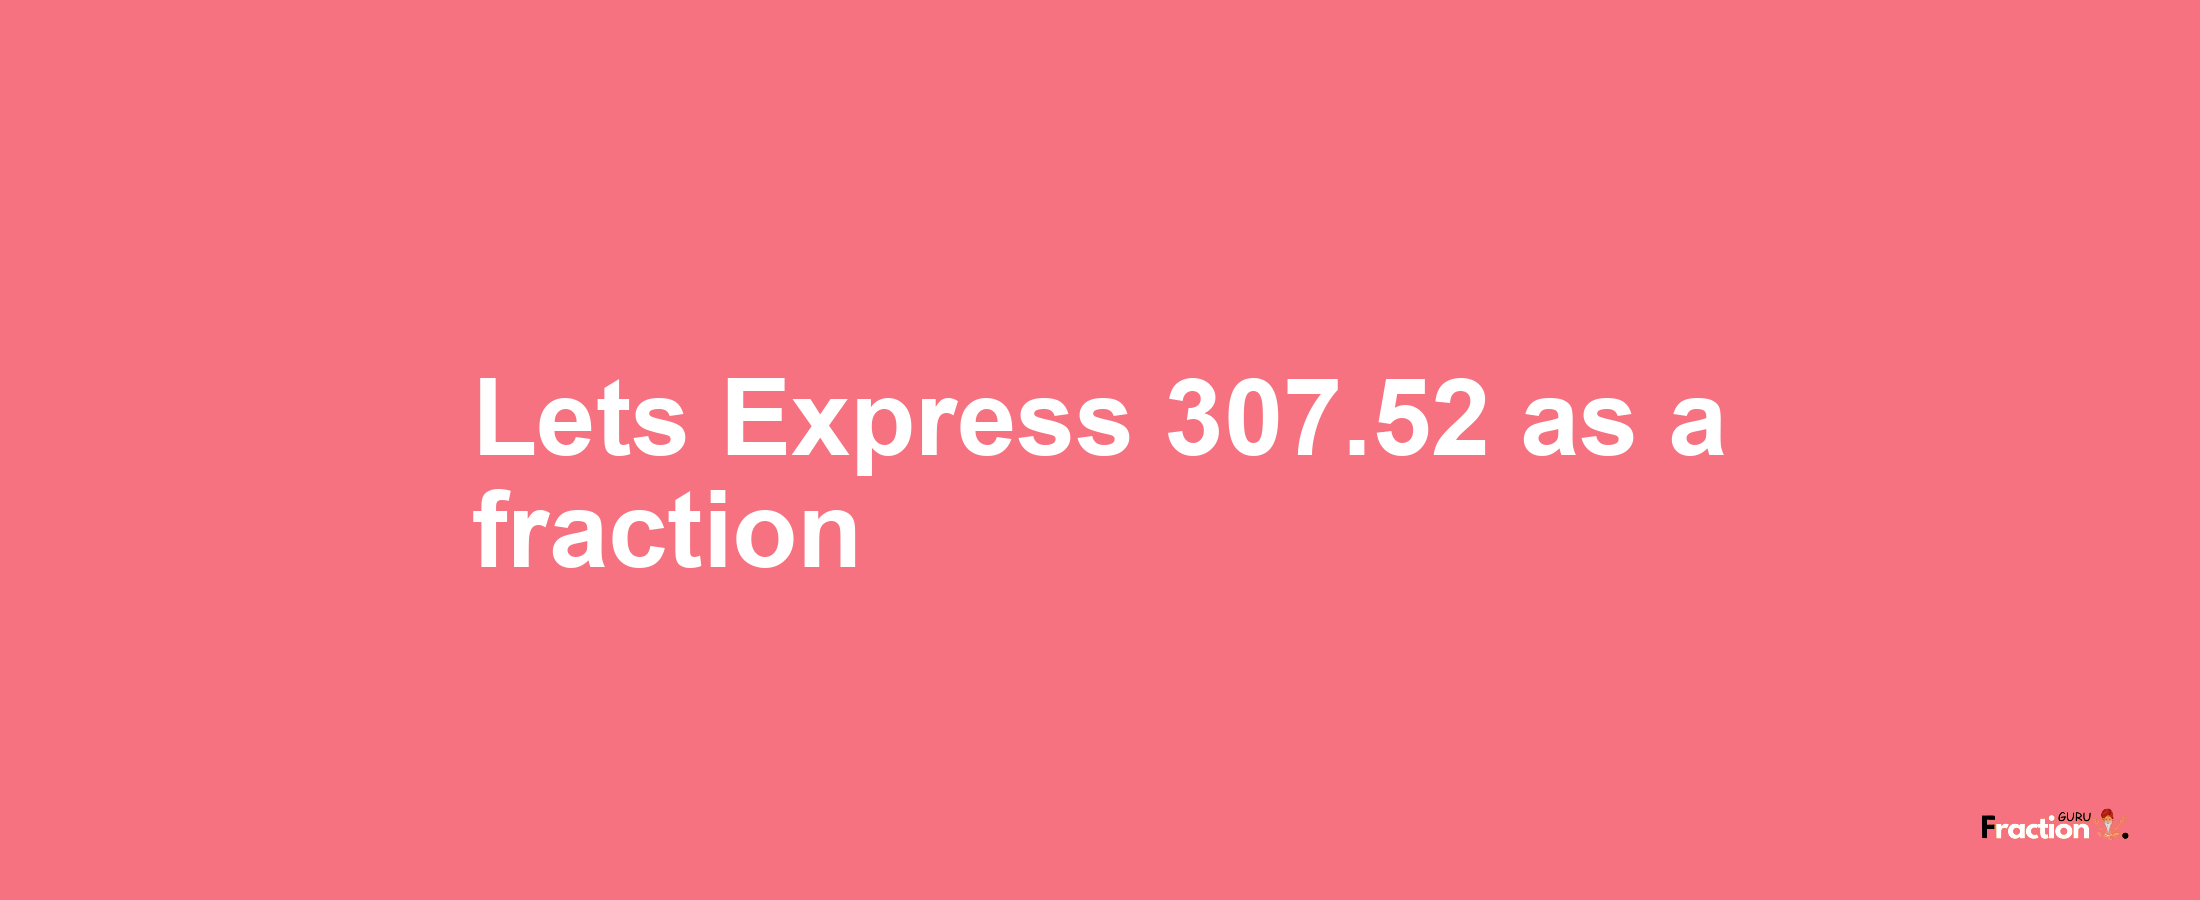 Lets Express 307.52 as afraction